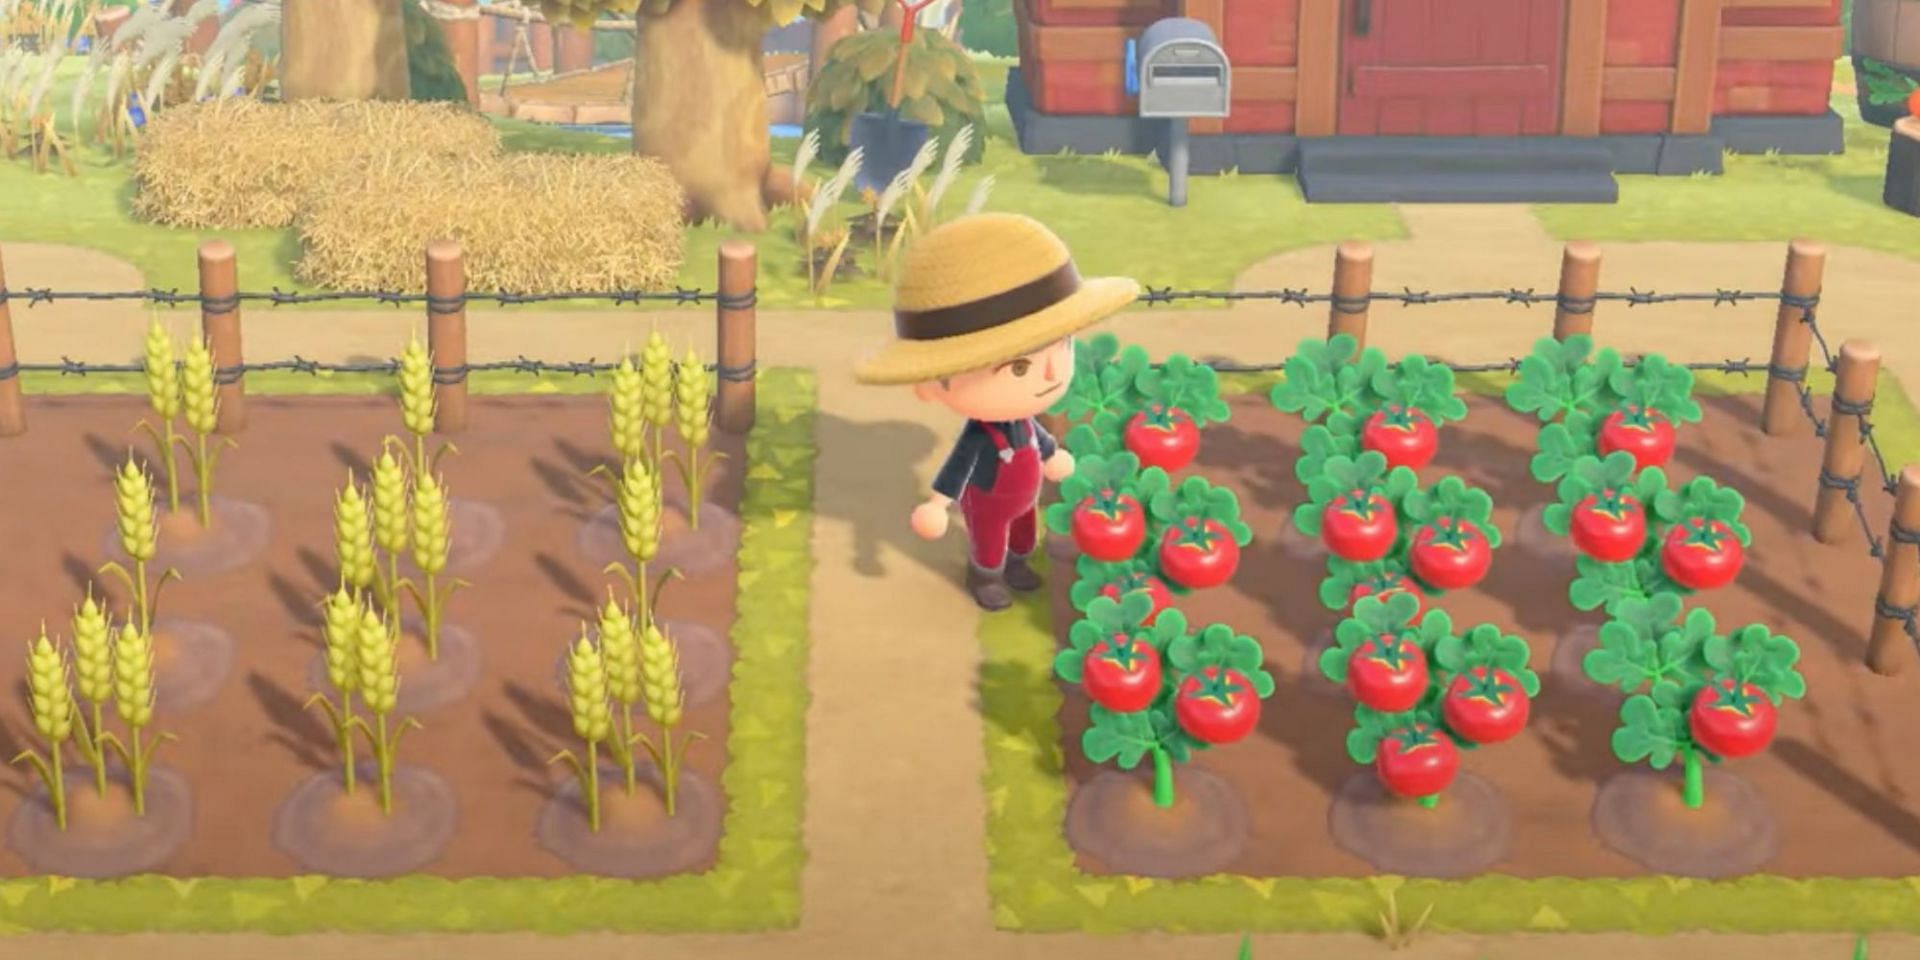 Tomatoes and wheat are two items added in the 2.0 update for cooking. Image via Nintendo